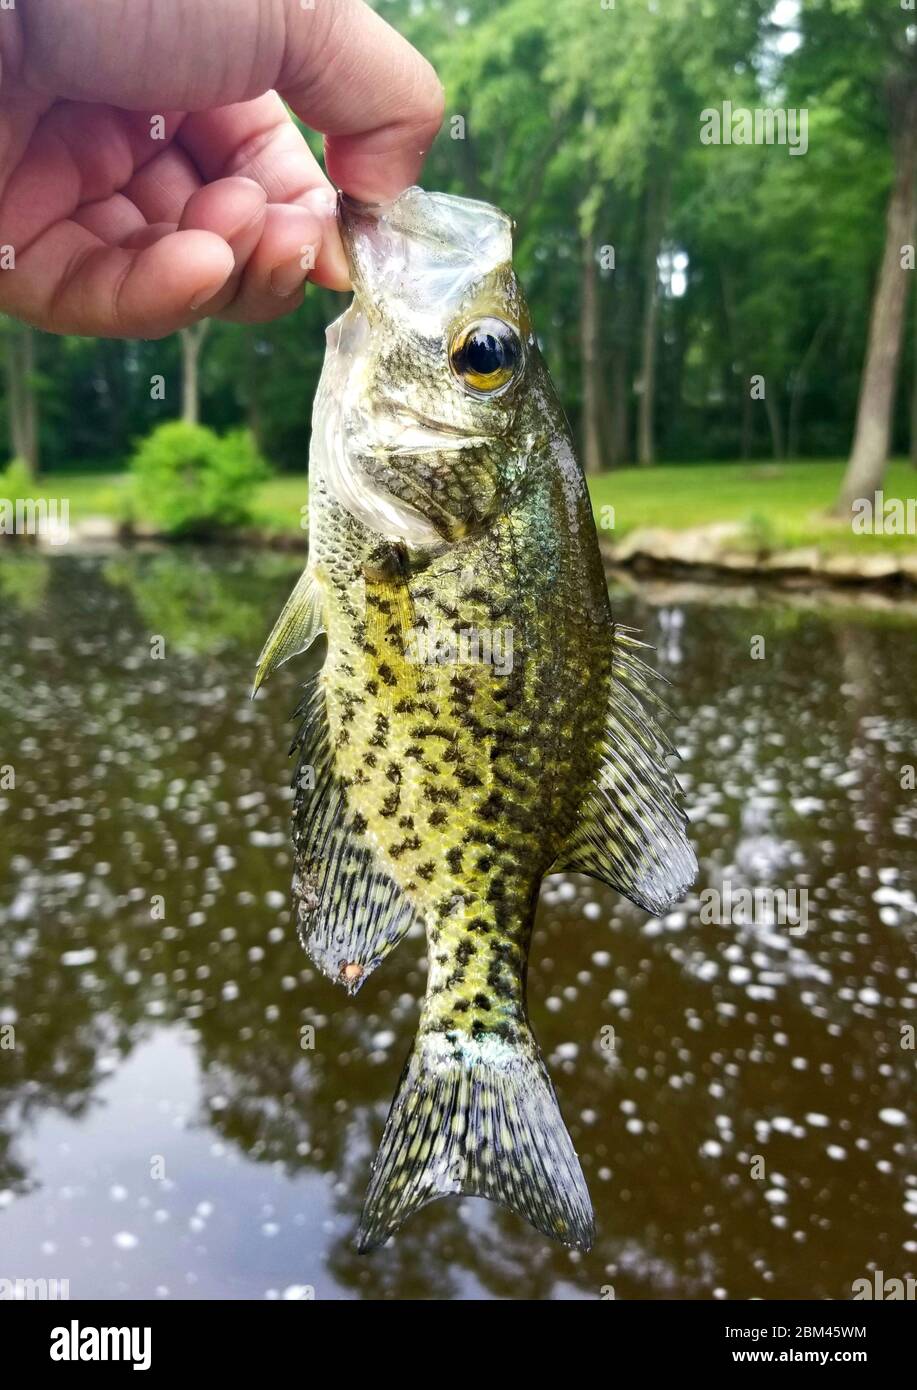 Holding a crappie fish before it being released in the river Stock Photo